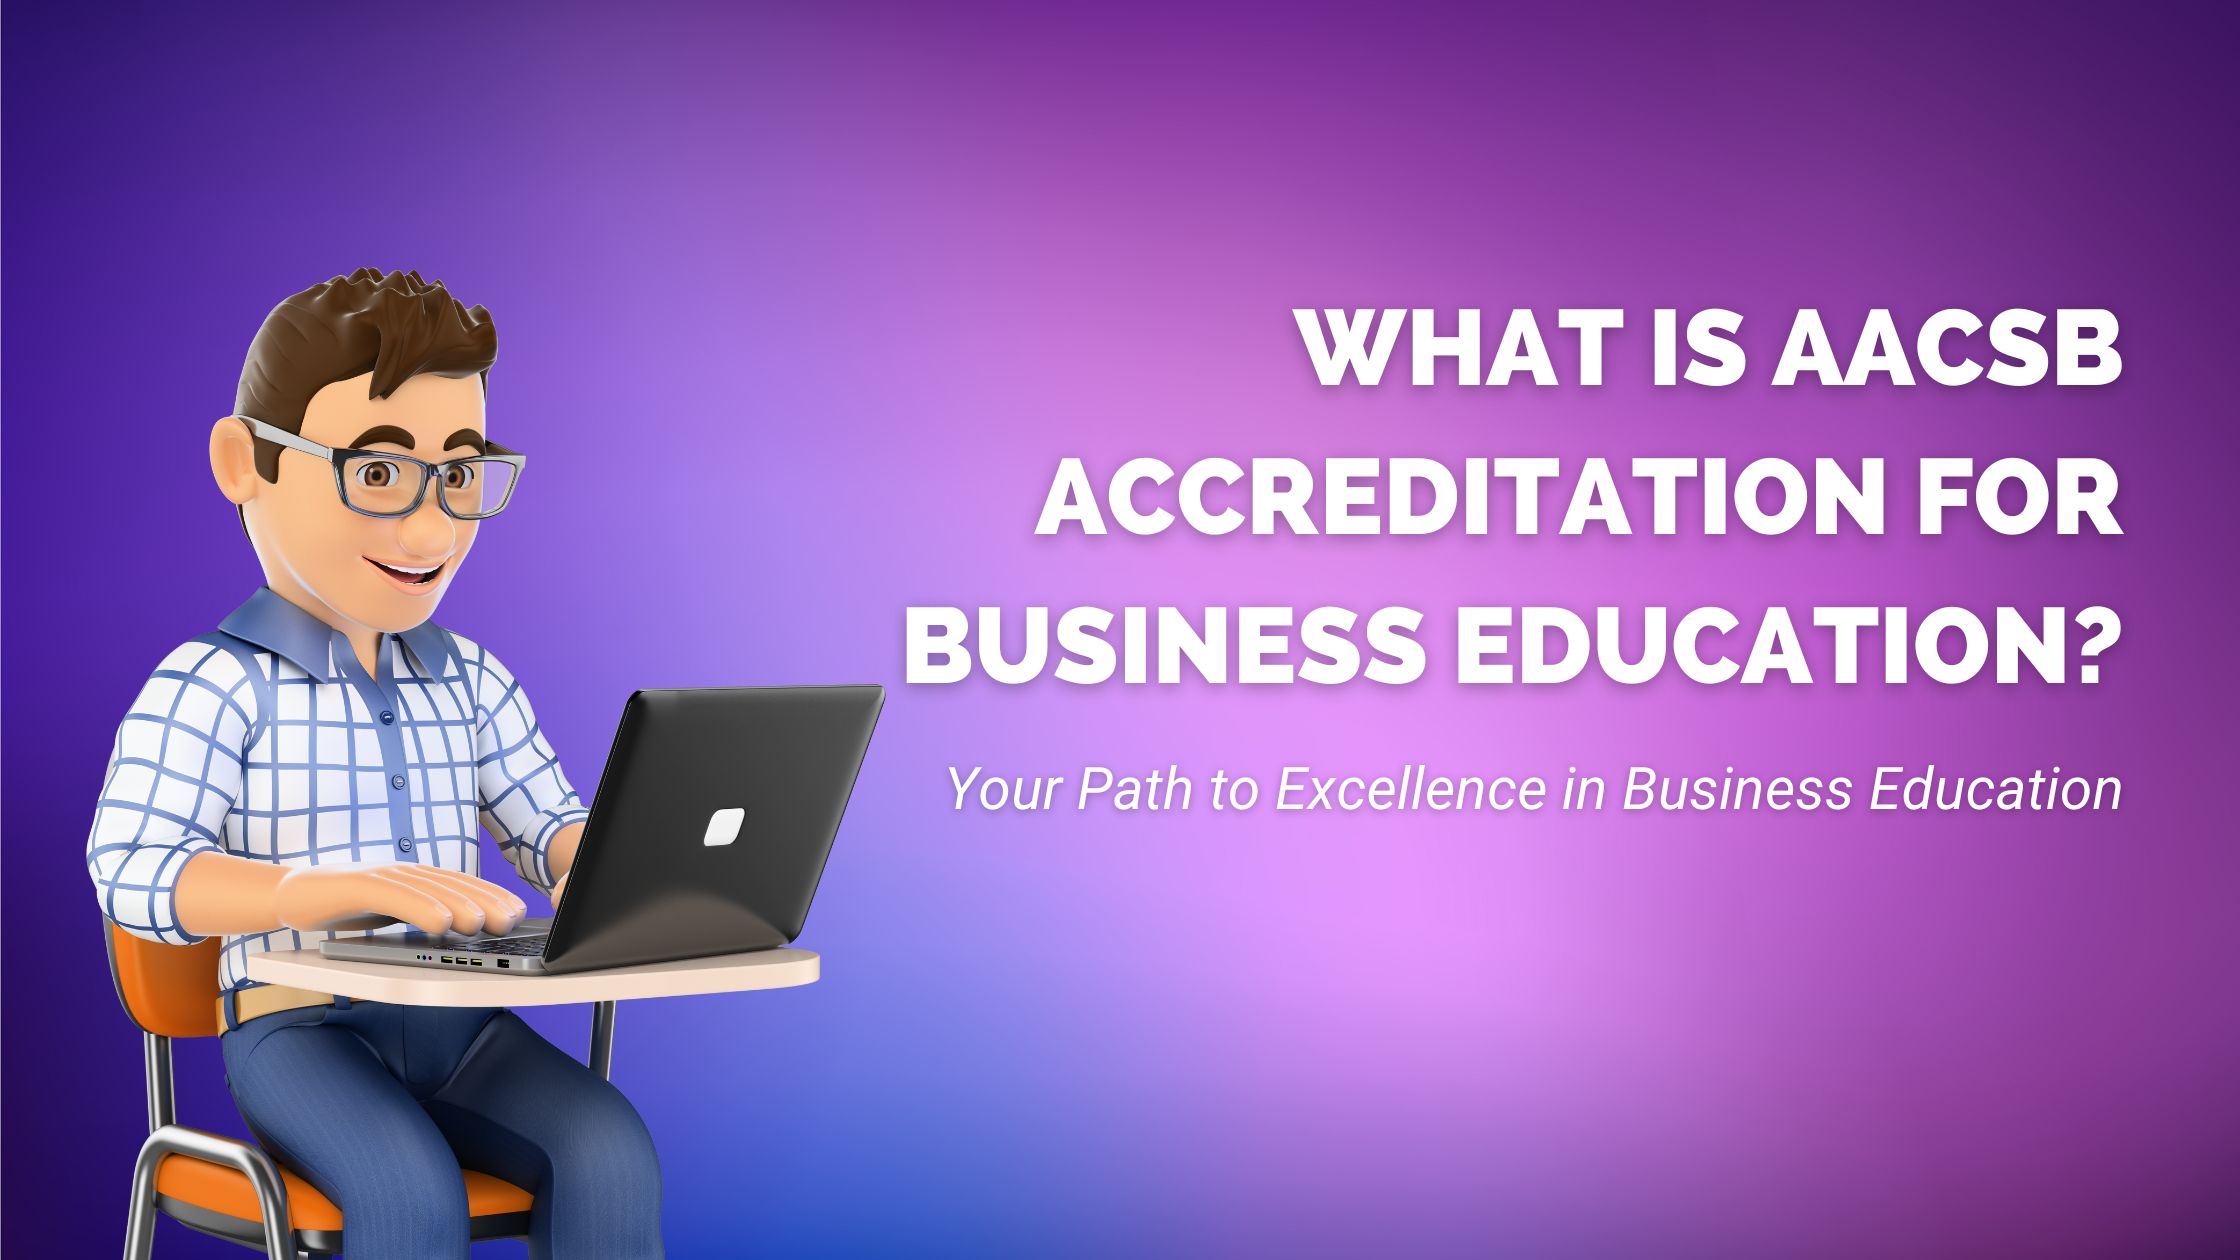 What is AACSB Accreditation for Business Education